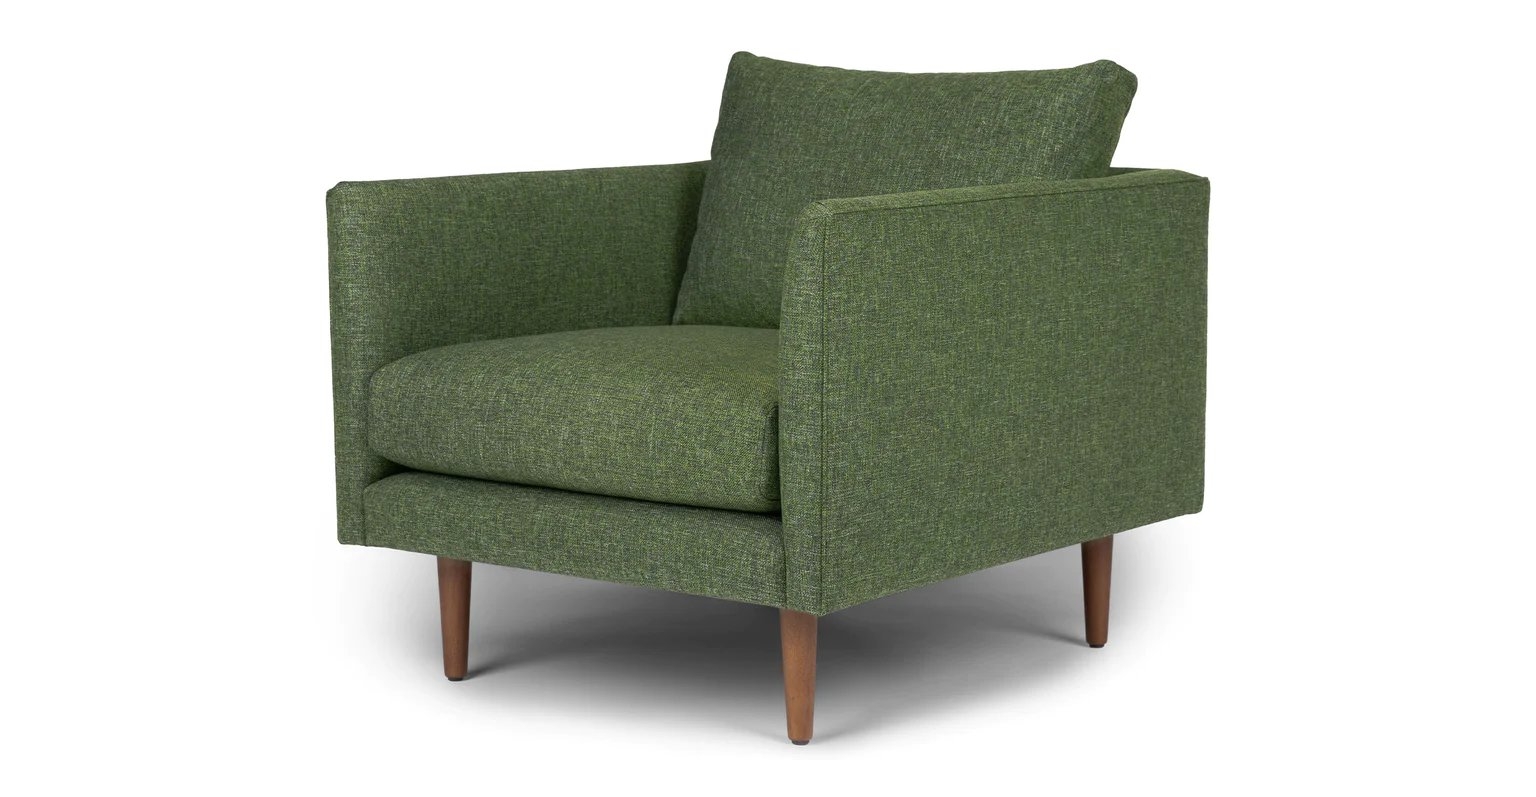 Burrard Forest Green Chair - Image 1